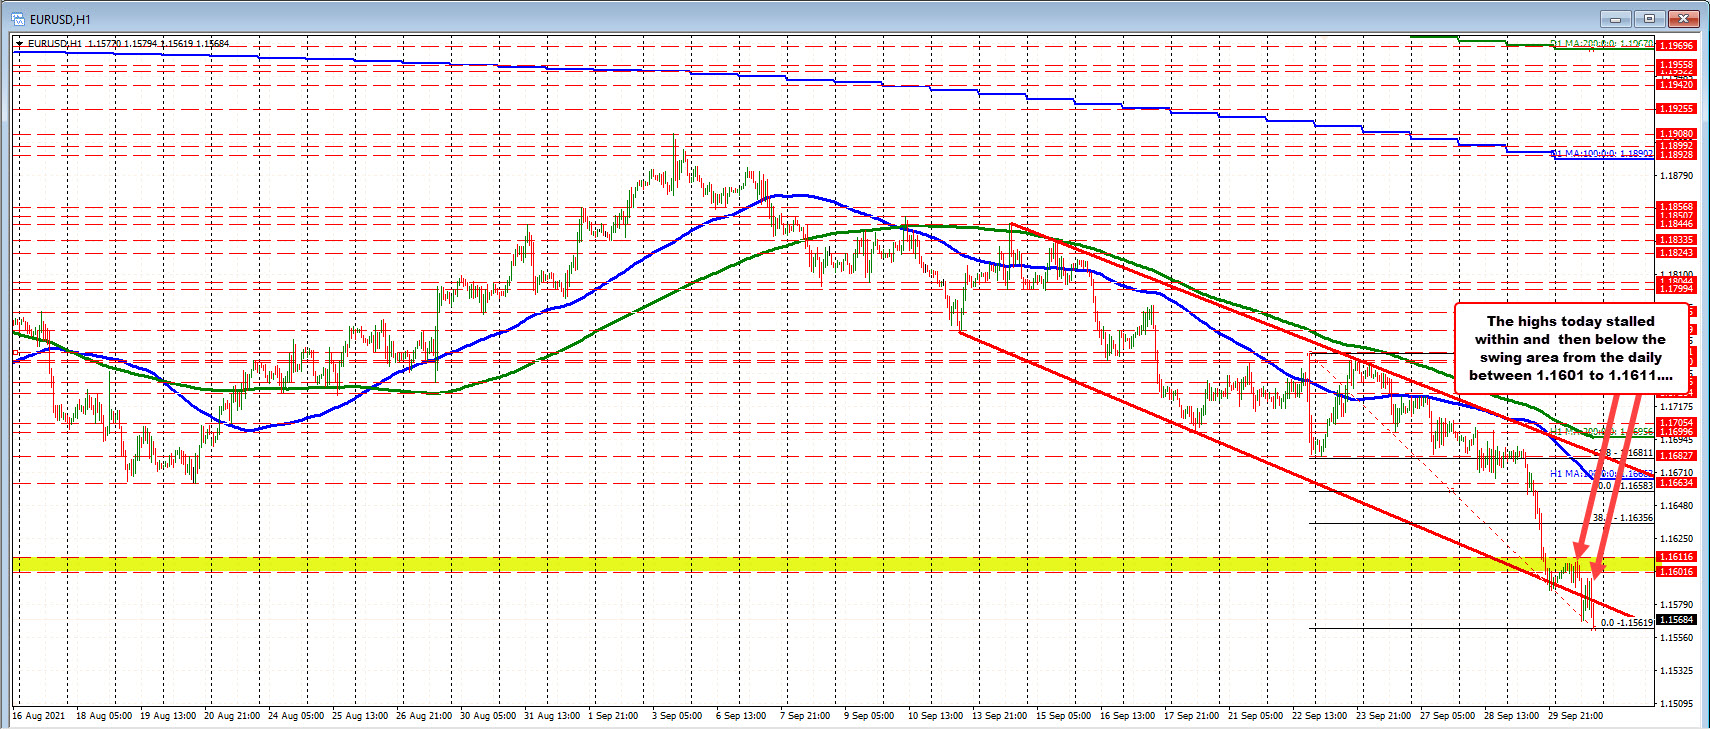 US session high stays below the swing area between 1.1601 and 1.1611.